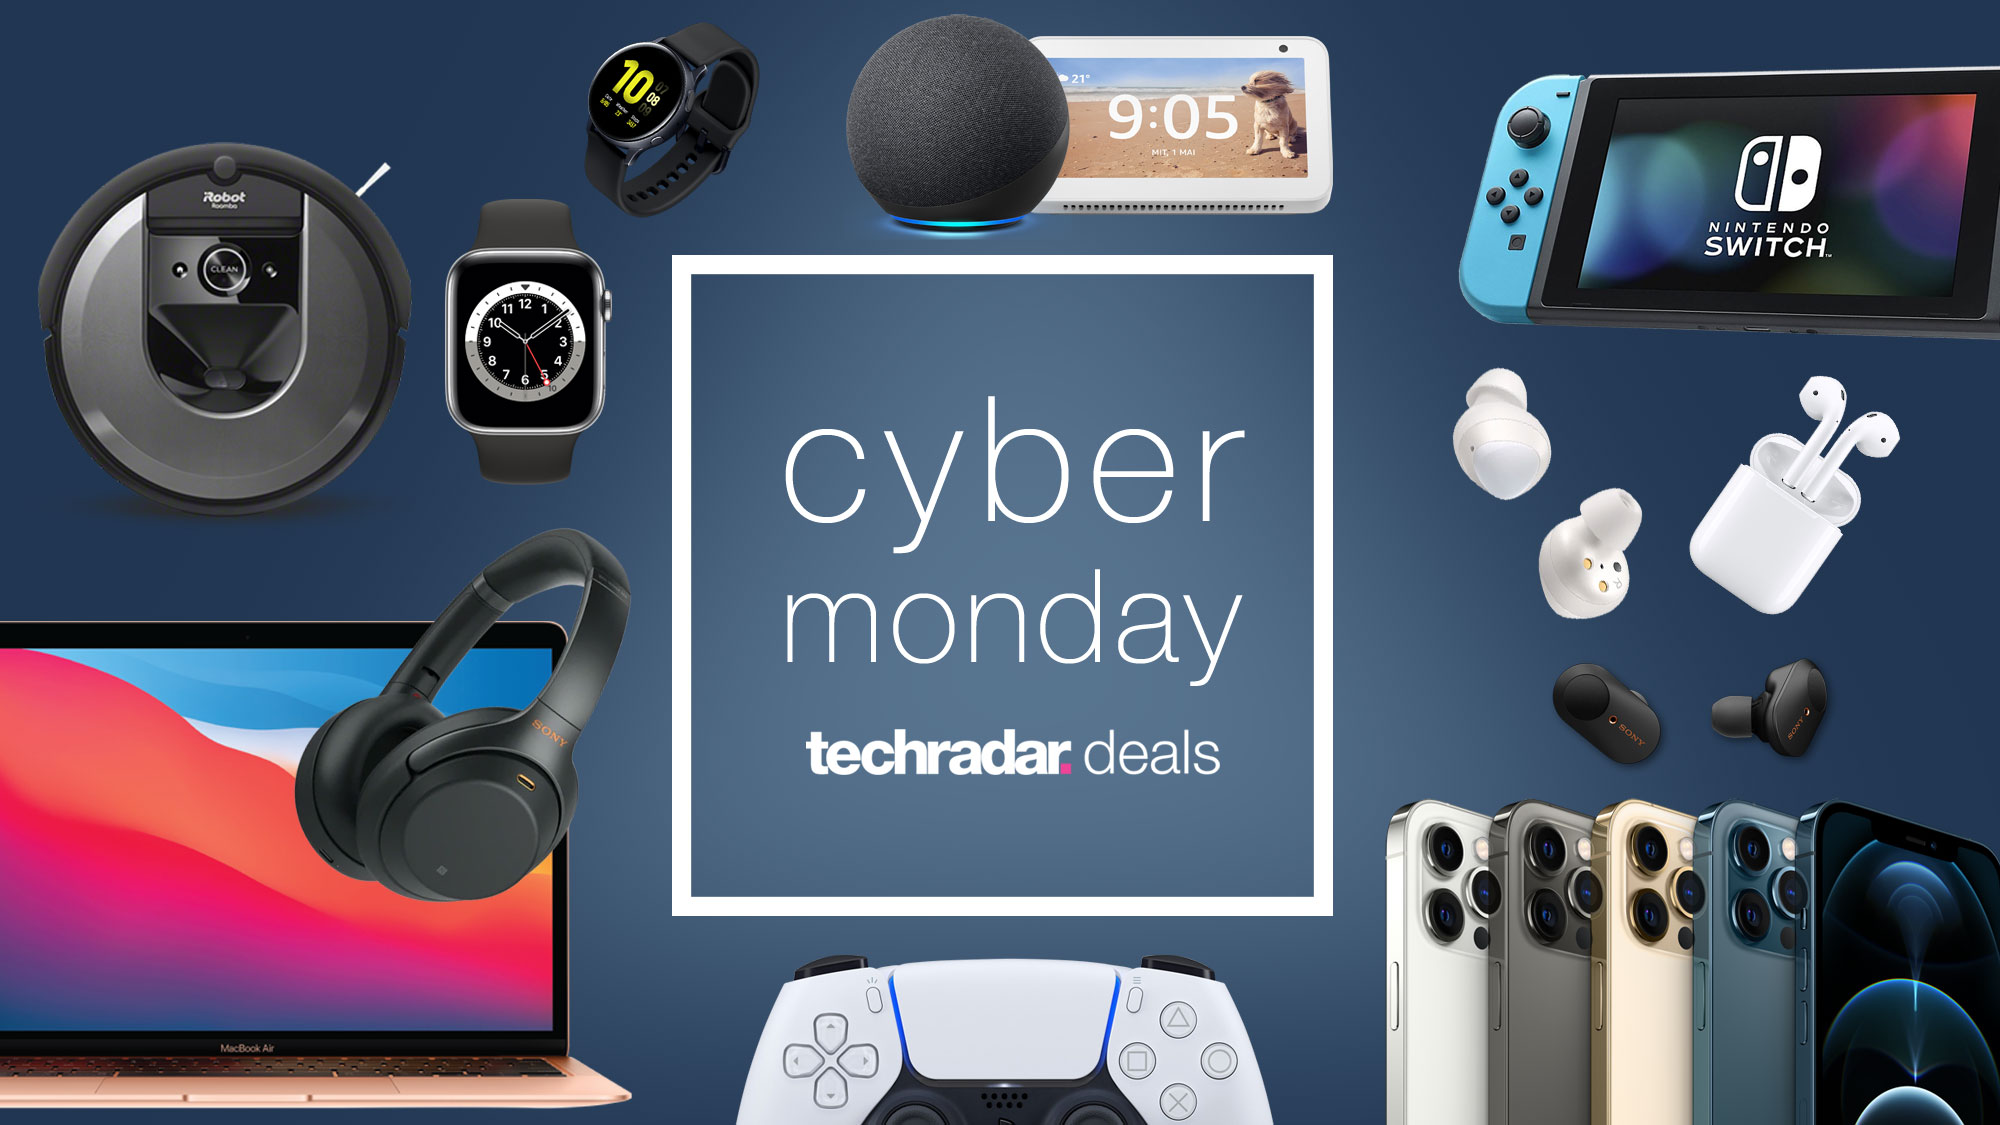 What Are The Best Deals Available Last Year On Cyber Monday